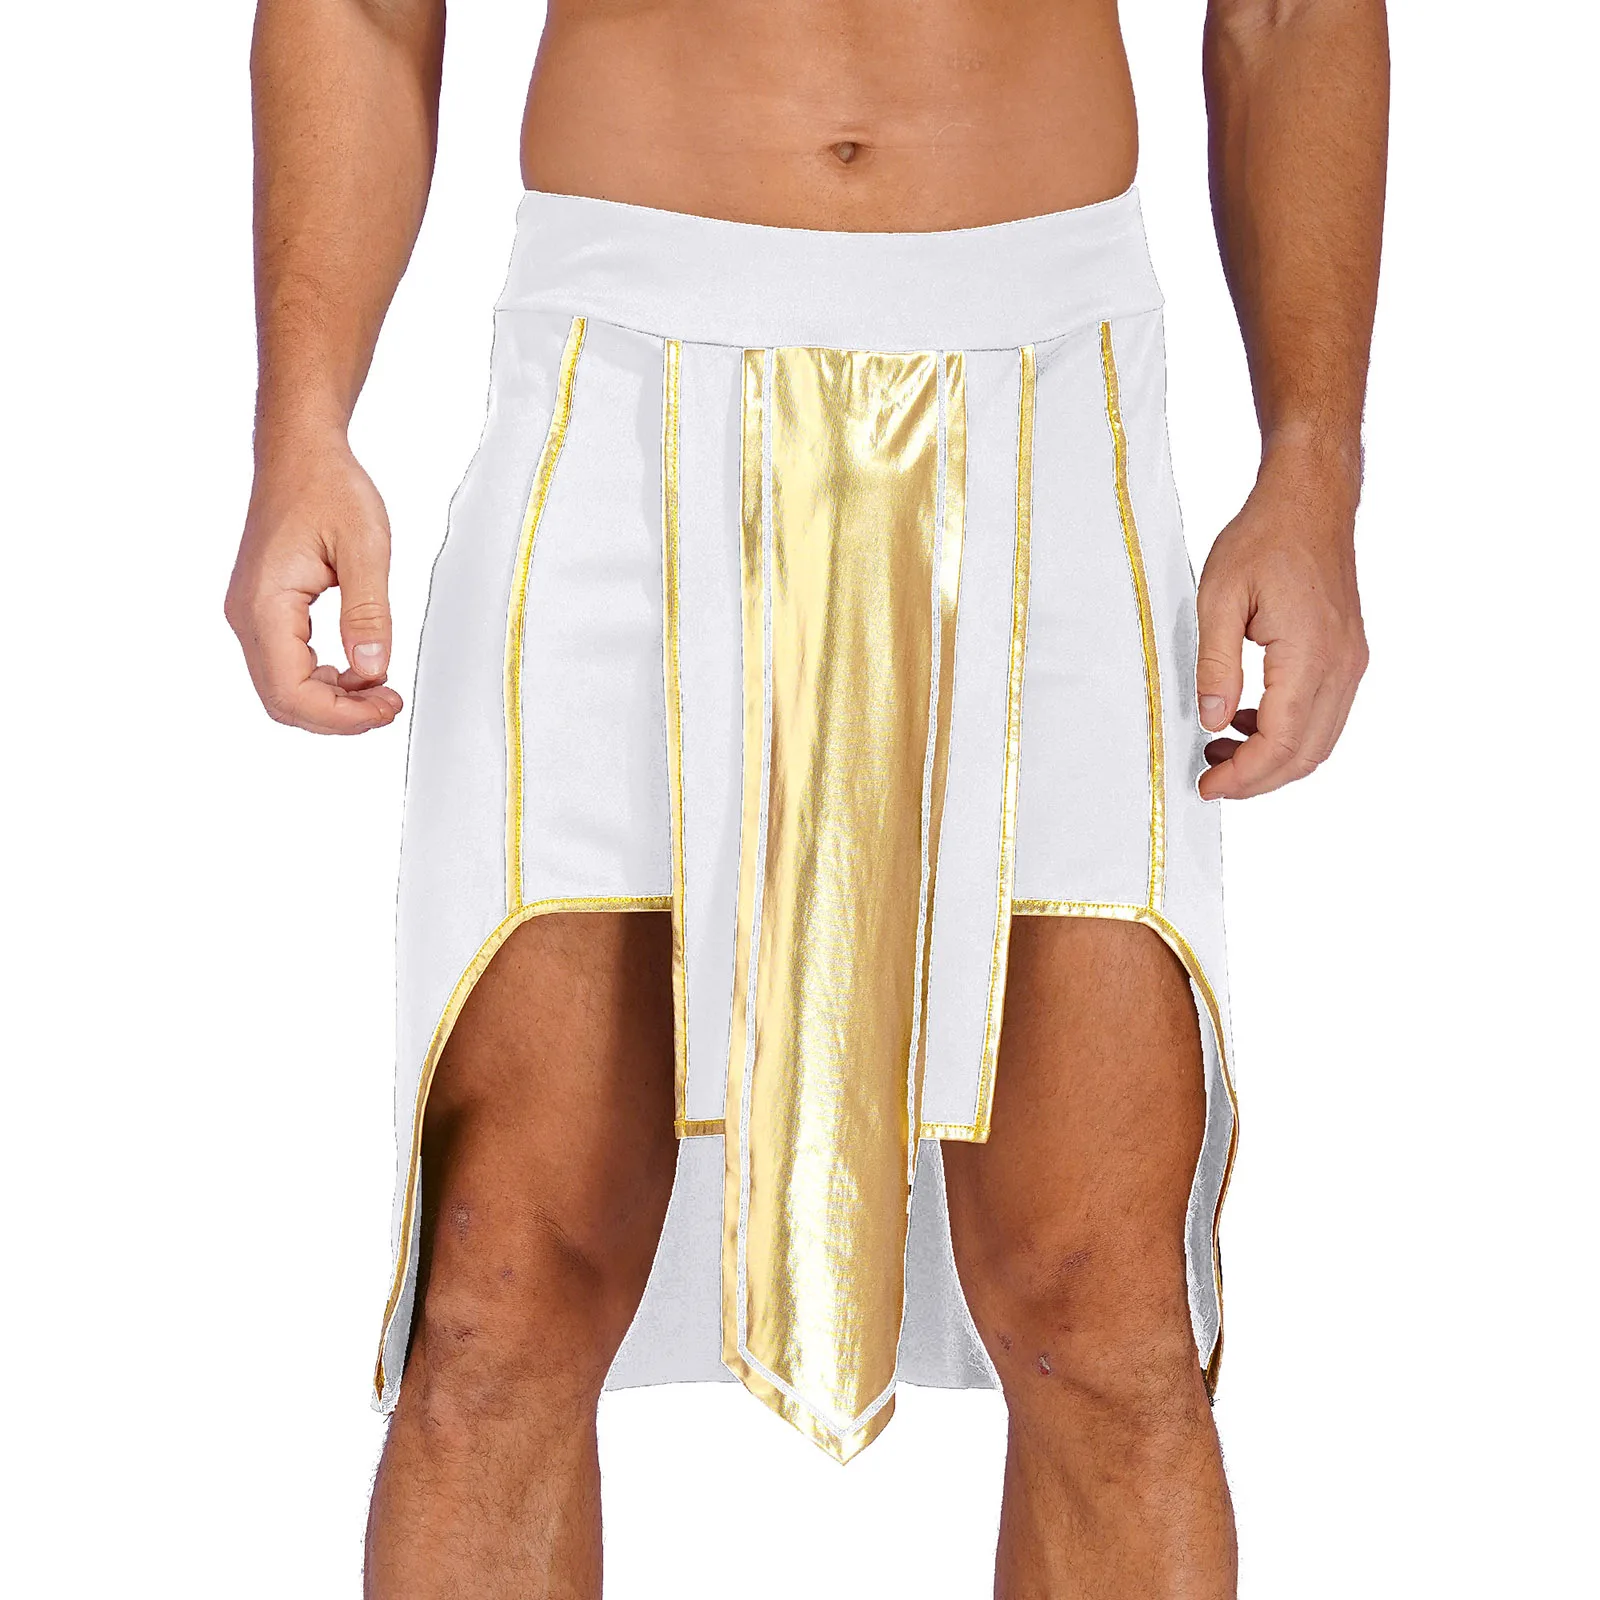 Mens Egyptian Pharaoh Cosplay Skirt Costume Egypt Priest Cosplay Party Costume Hem Skirt Ancient Roleplay Halloween Outfit